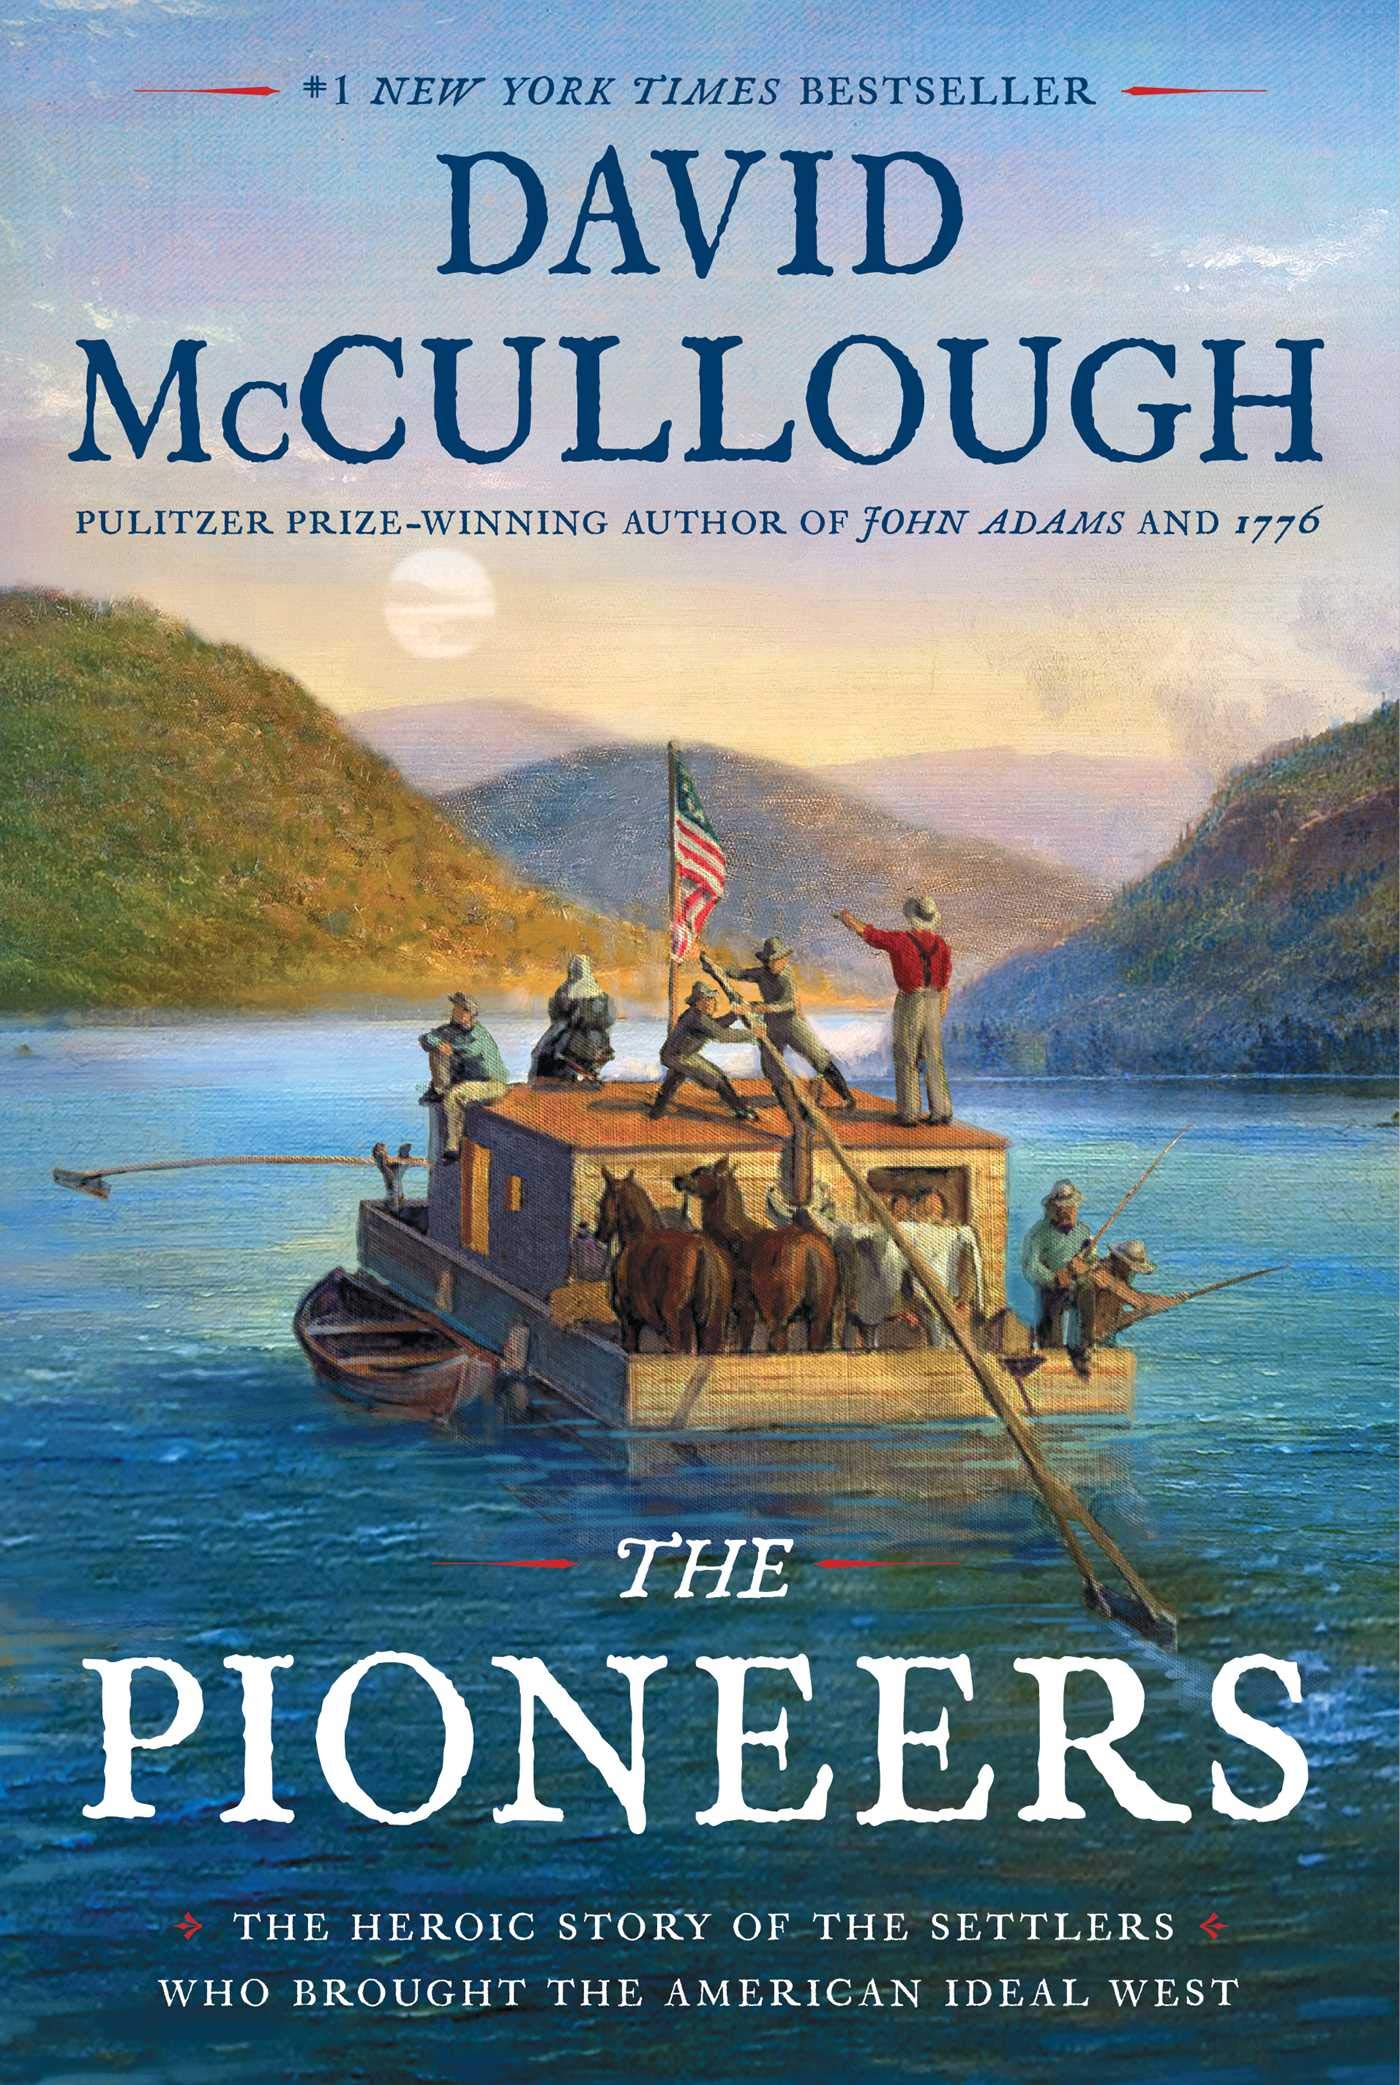 Cover of "The Pioneers: The Heroic Story of the Settlers Who Brought the American Ideal West" by David McCullough